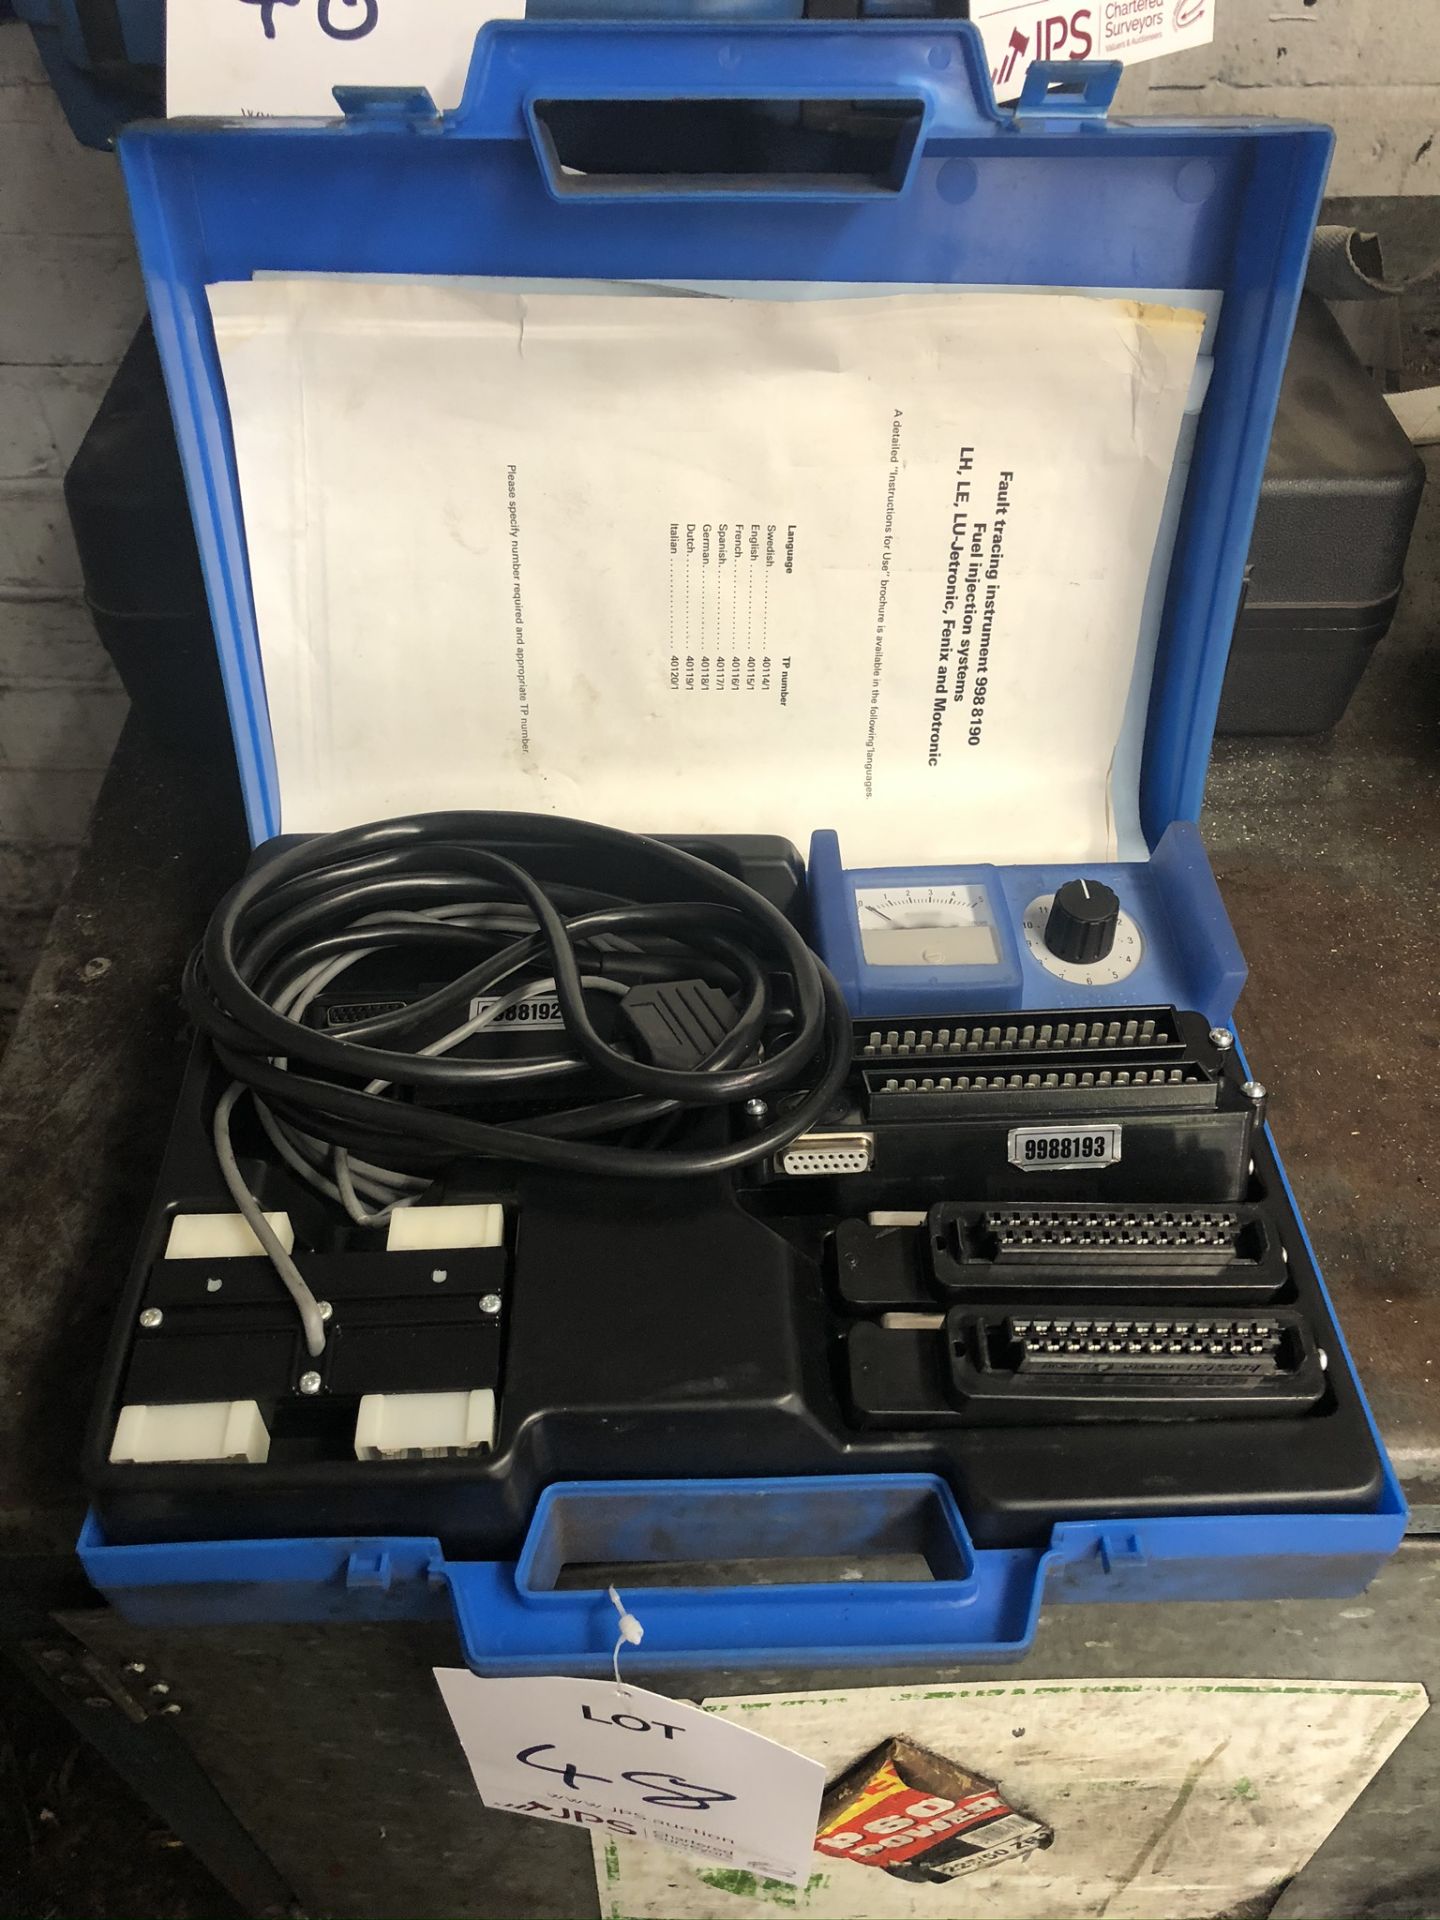 Volvo 998-8195 Jettronic & Montronic Diagnostic Tool